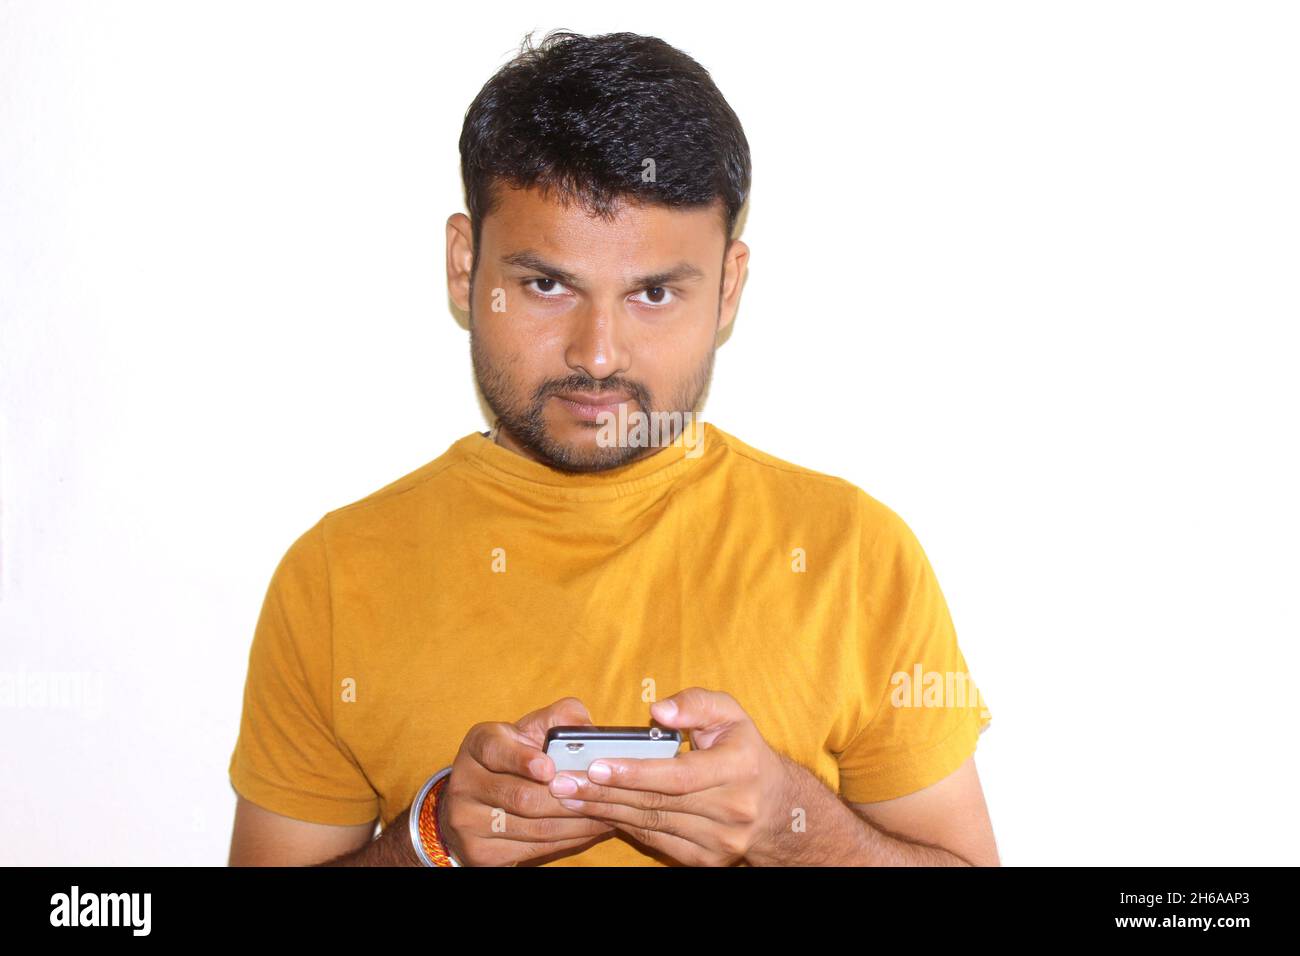 Attractive male using mobile phone, thinks about something, looks doubtfully upwards, Indian male student texting on smart phone, .against white concr Stock Photo